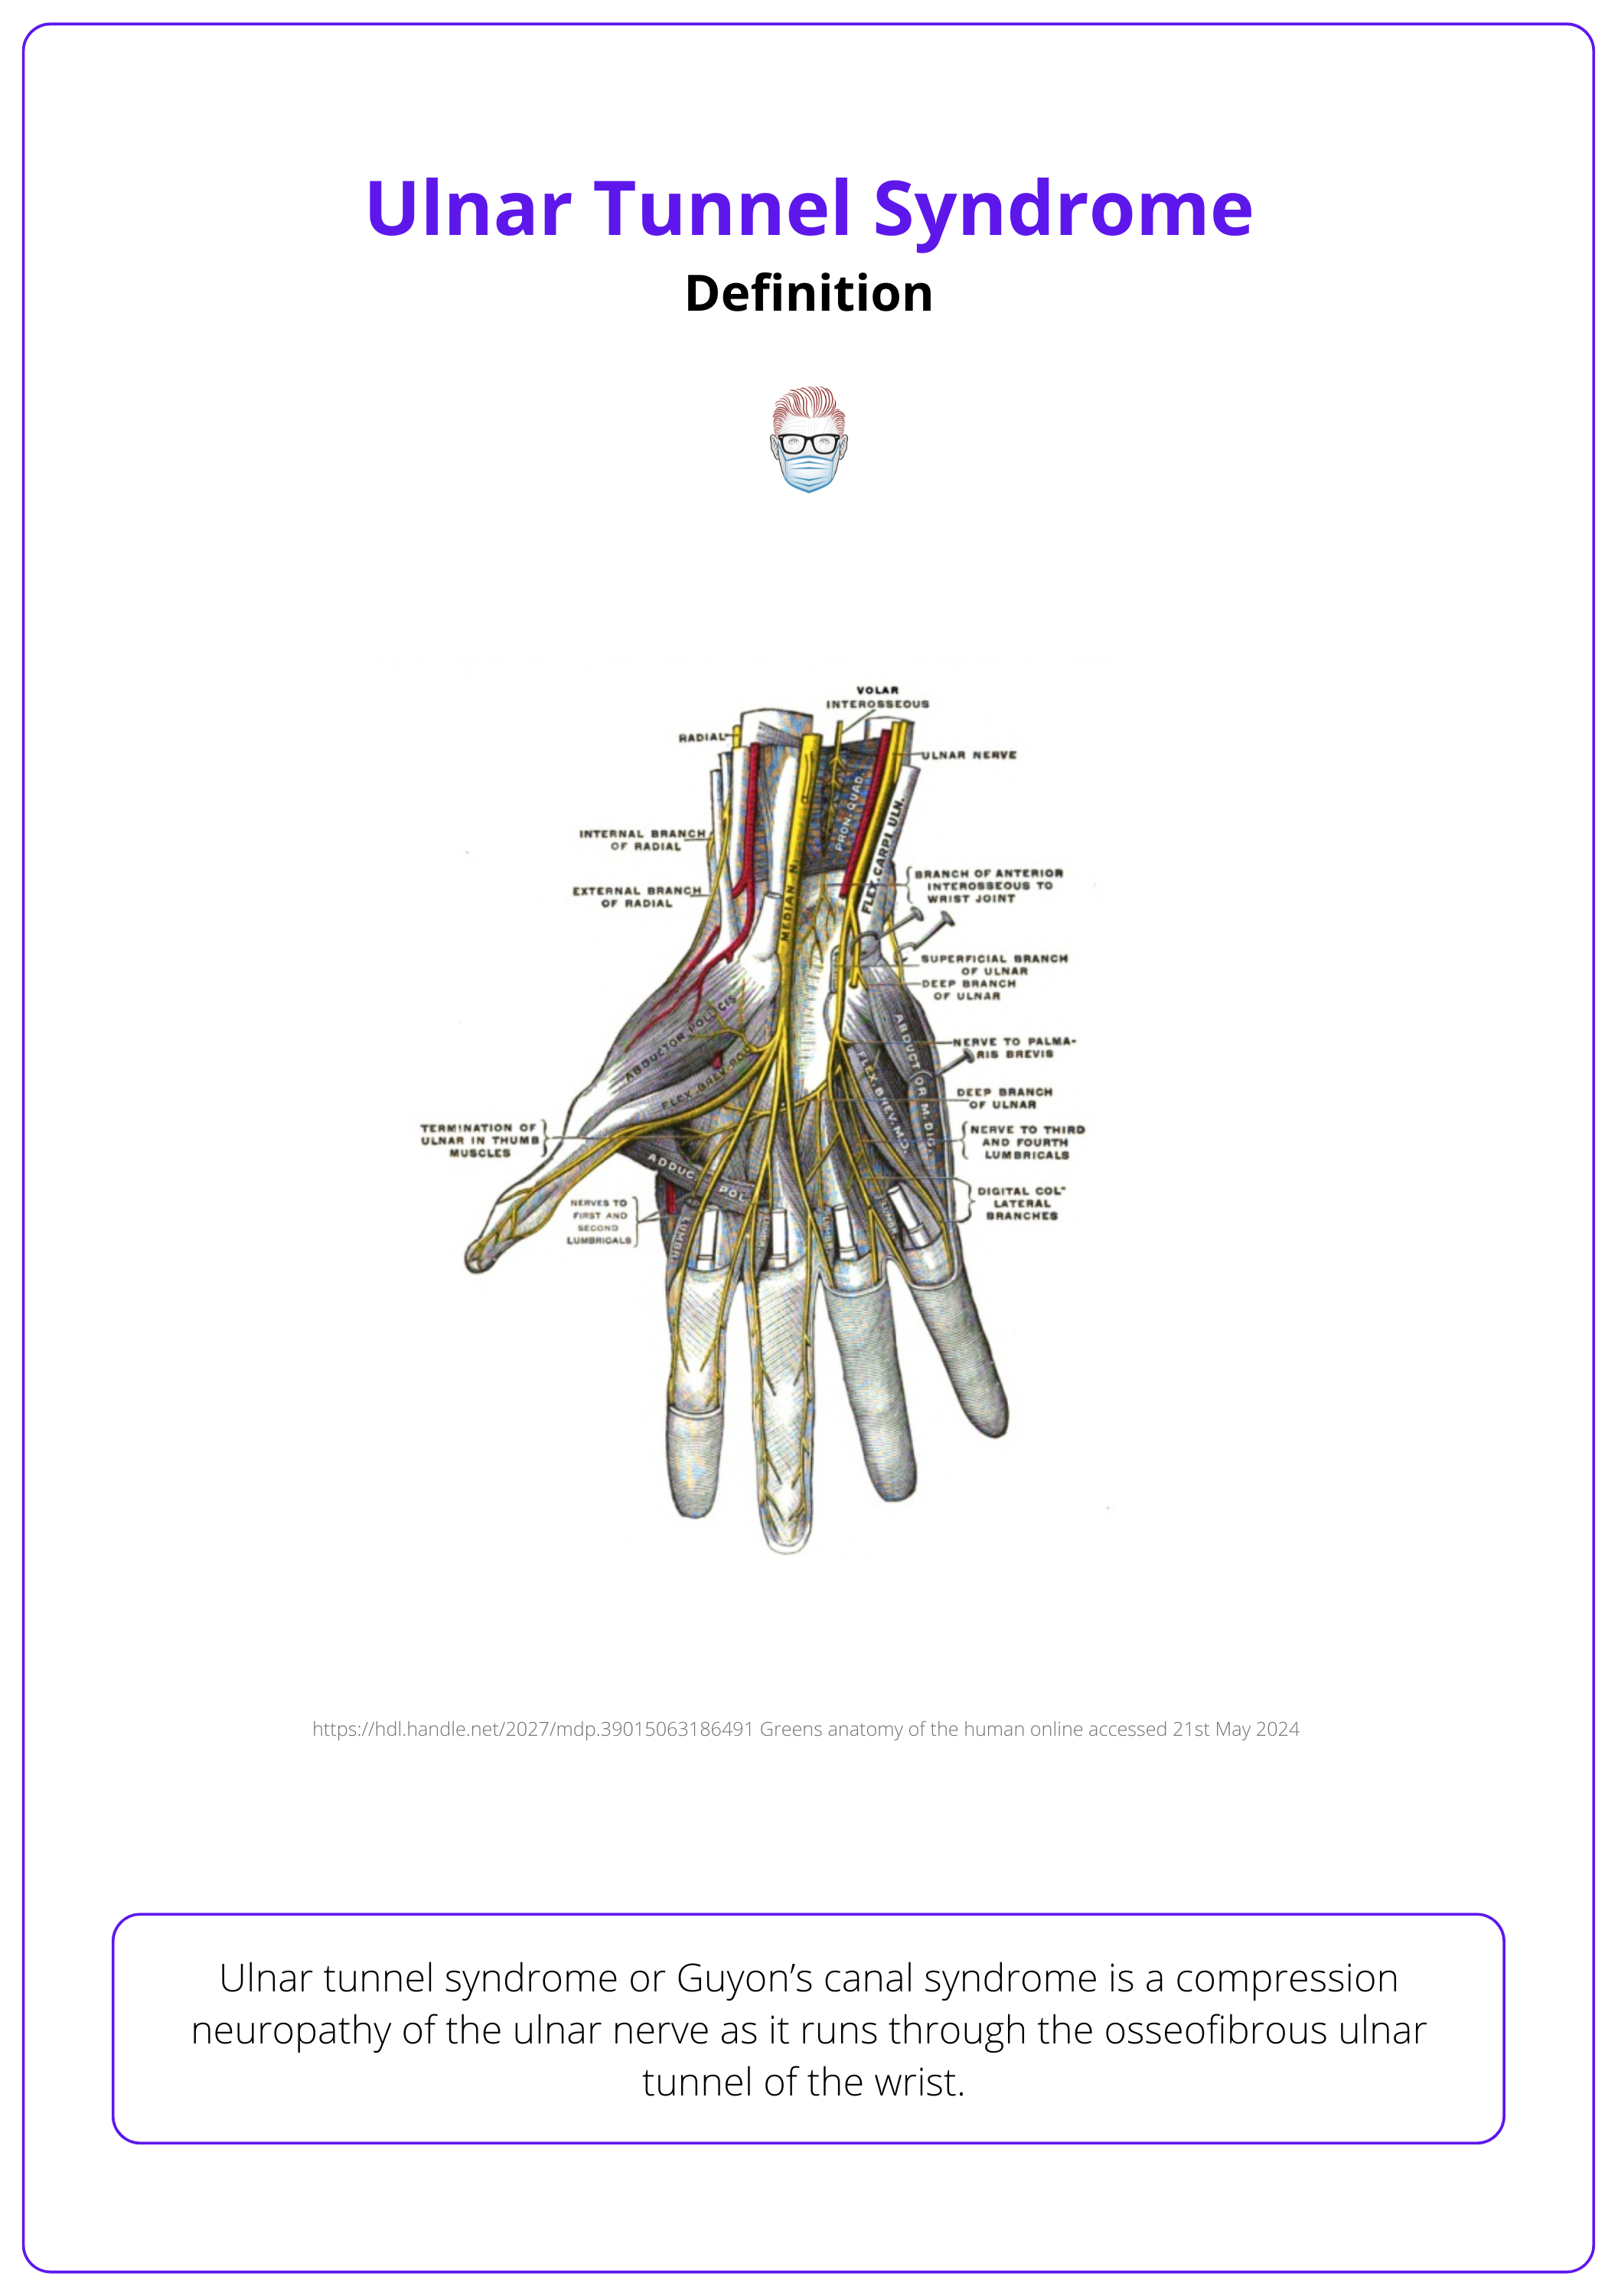 Anatomy of the ulnar nerve through Guyon’s canal.